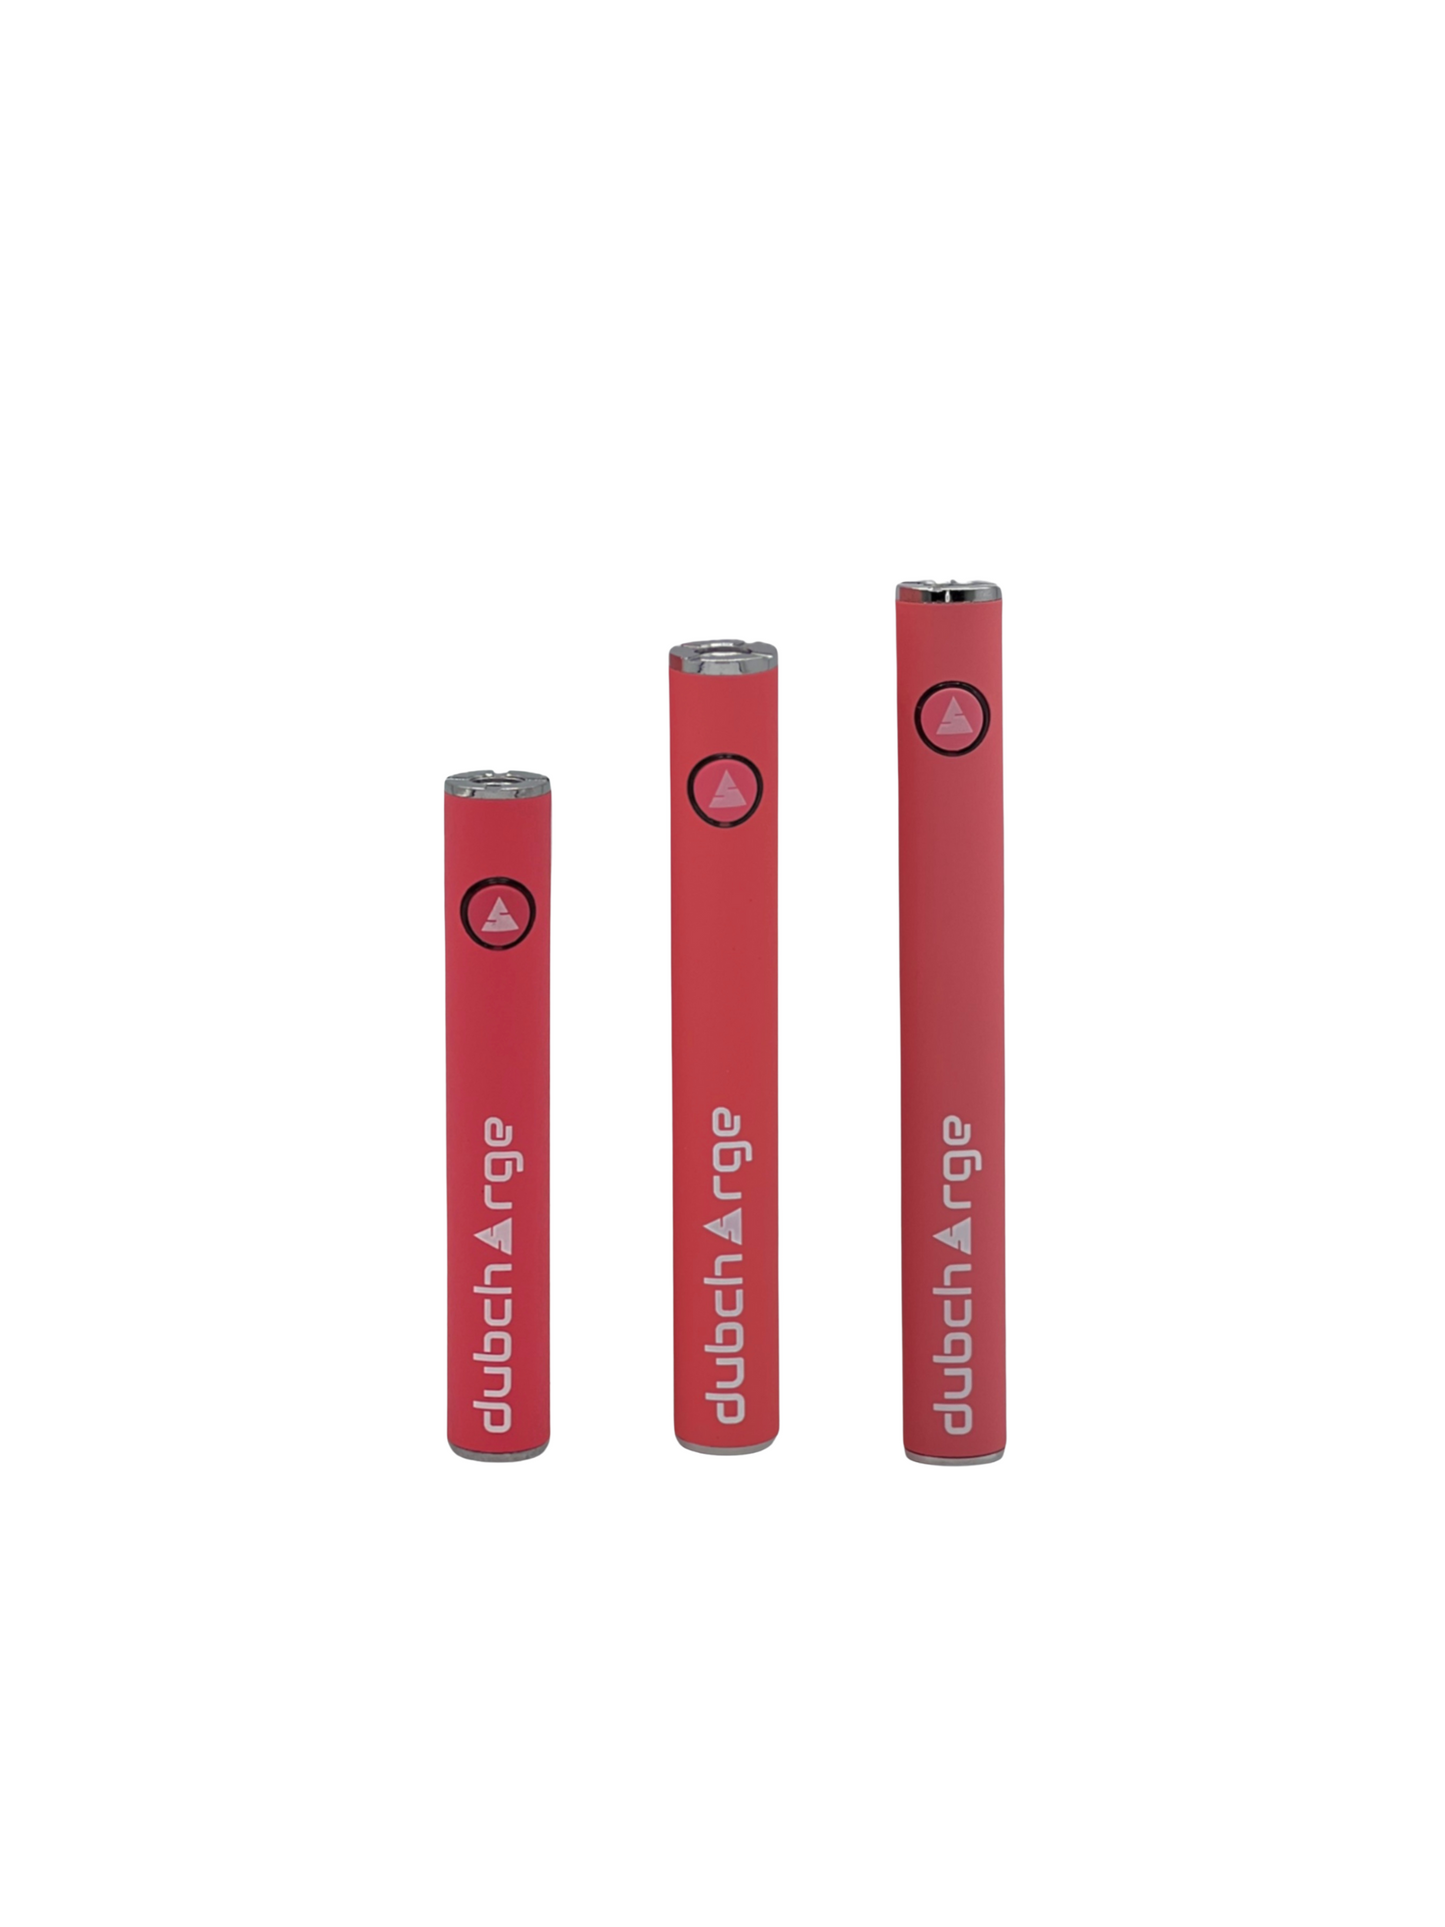 V3 Battery Pack Bundle | 510 Thread Compatible | Long-Lasting Power Source | Best-Selling Vape Accessories